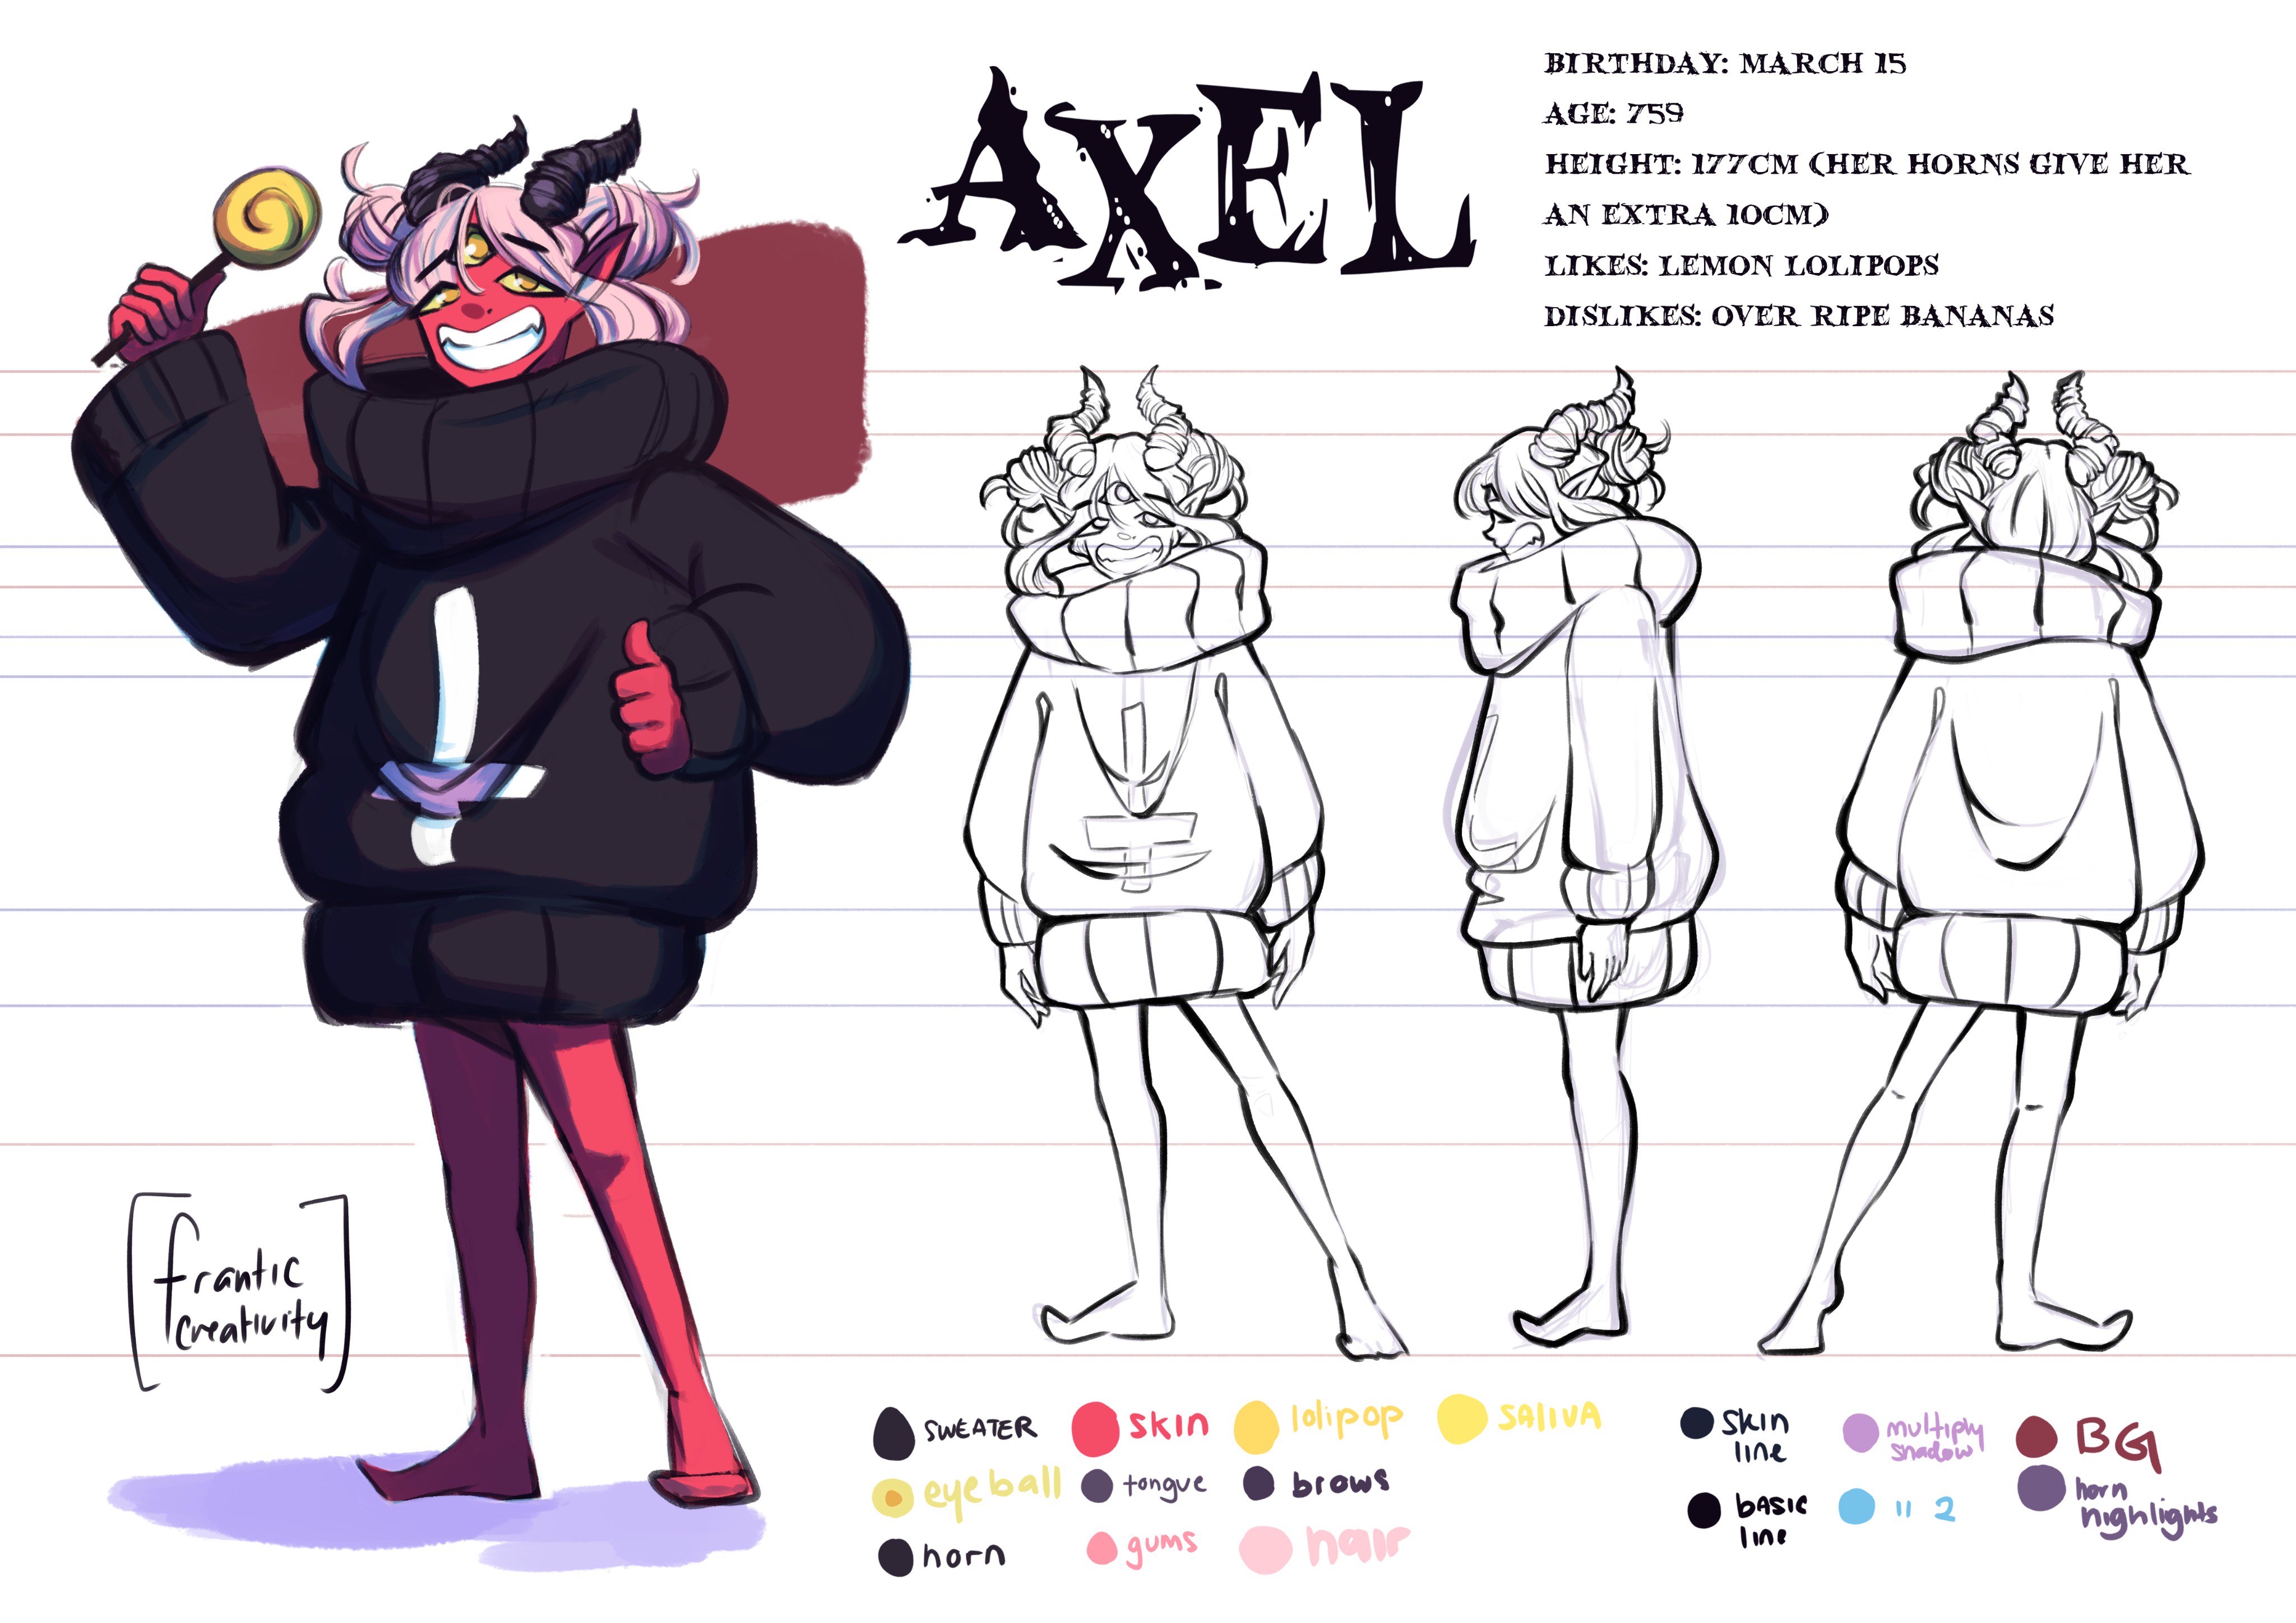 O Xrhsths Franticcreativity Cosfest D08 Sto Twitter Finished Character Sheet For My Oc Axel Heh D Draw Drawing Art Oc Digitalart Demon Fantasy Horns 3eyes Illustration